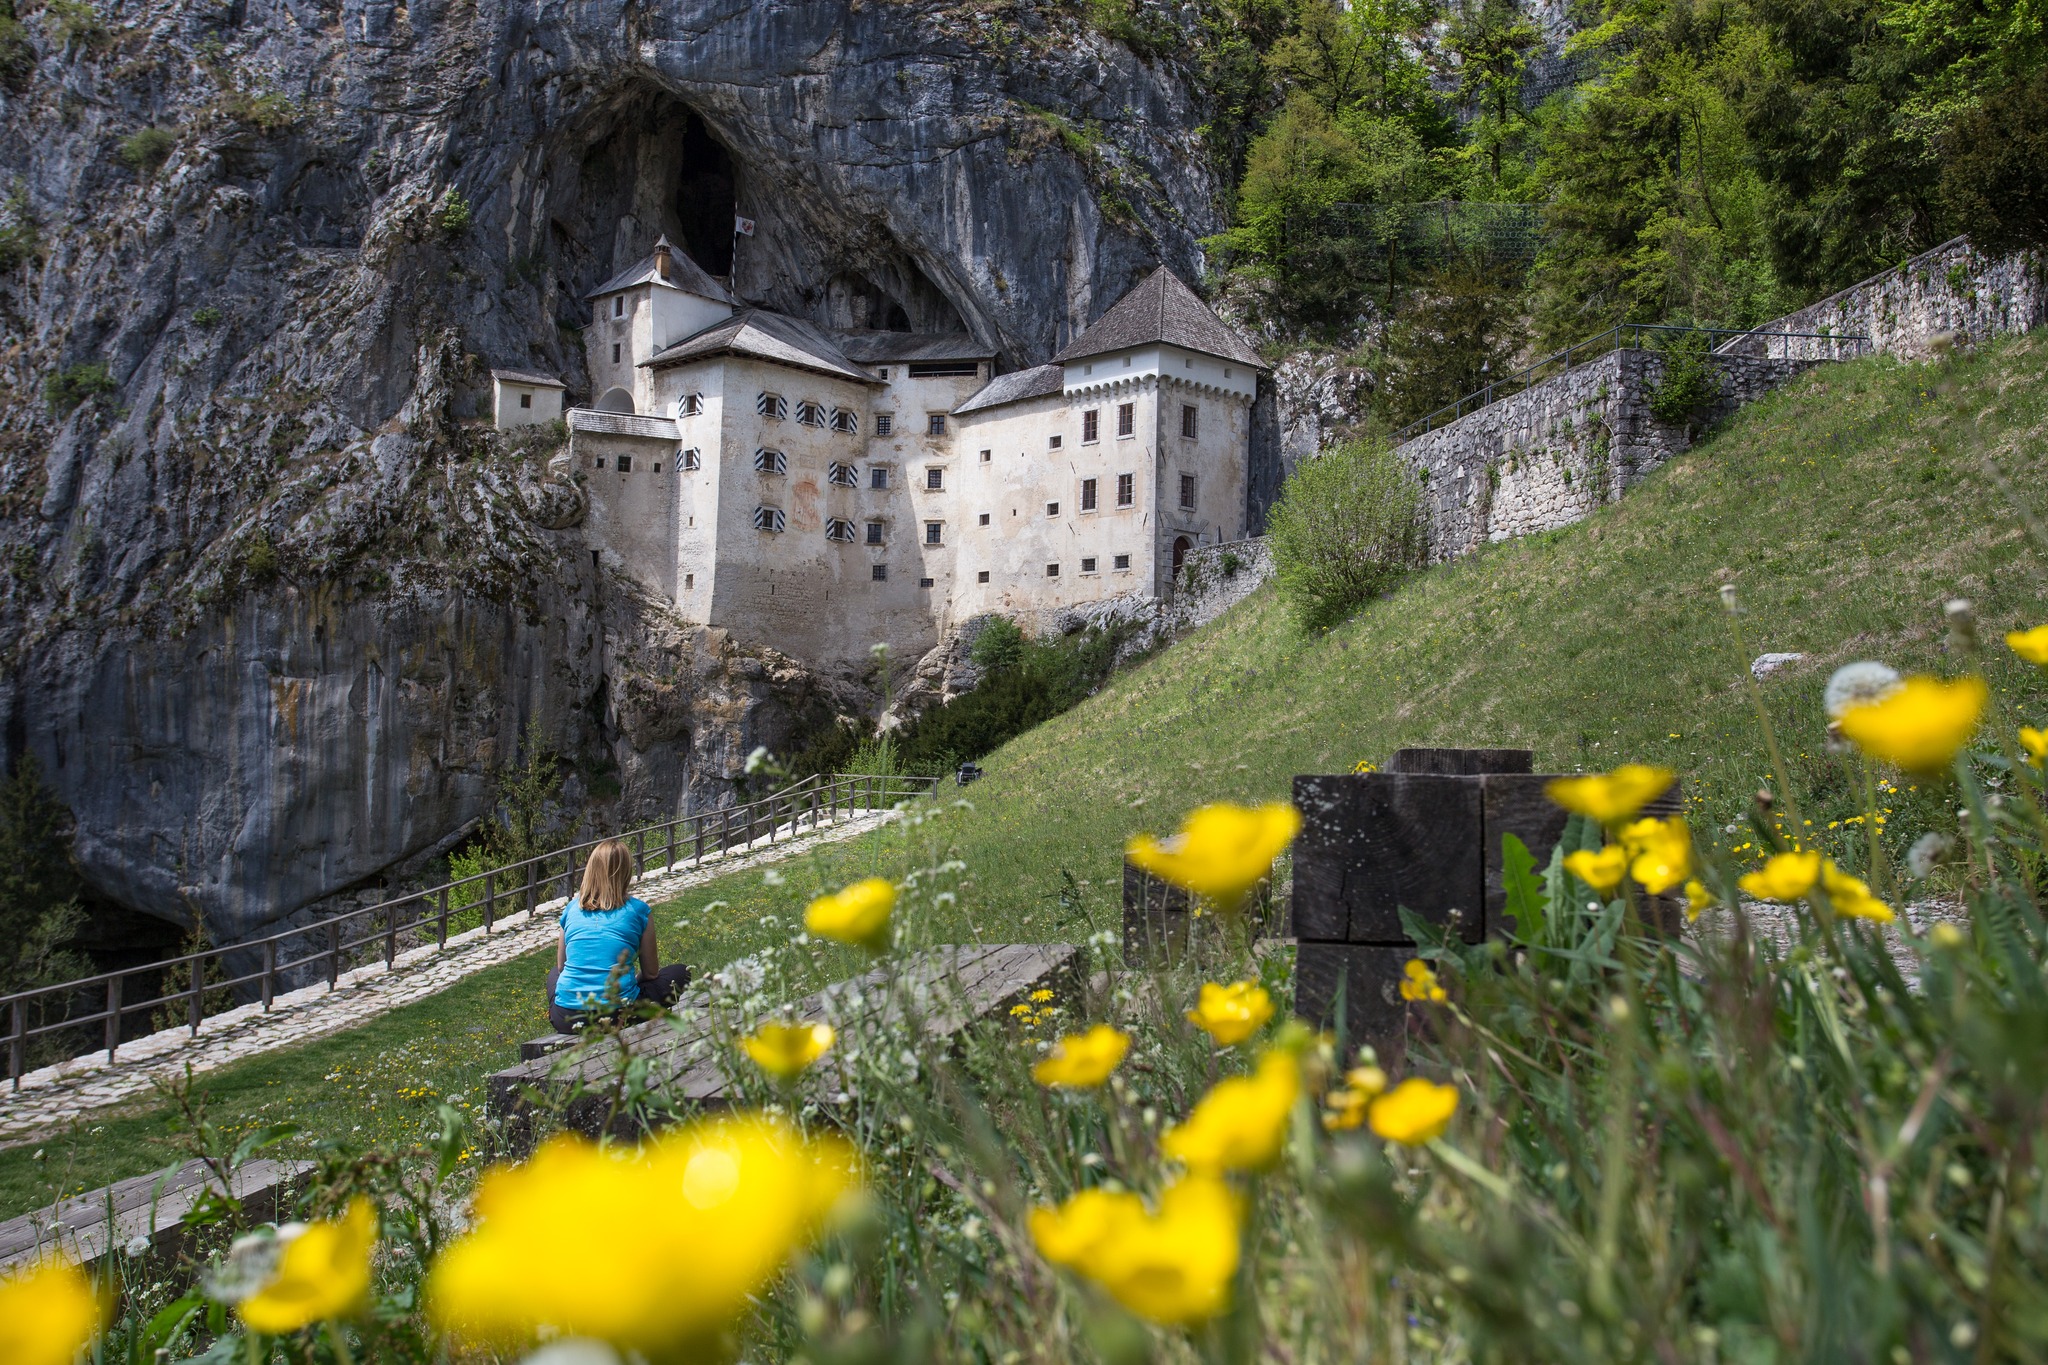 Predjama Castle, a meadow with blooming daisies in front of it, a woman in a blue shirt sits on a bench, looking at the castle.